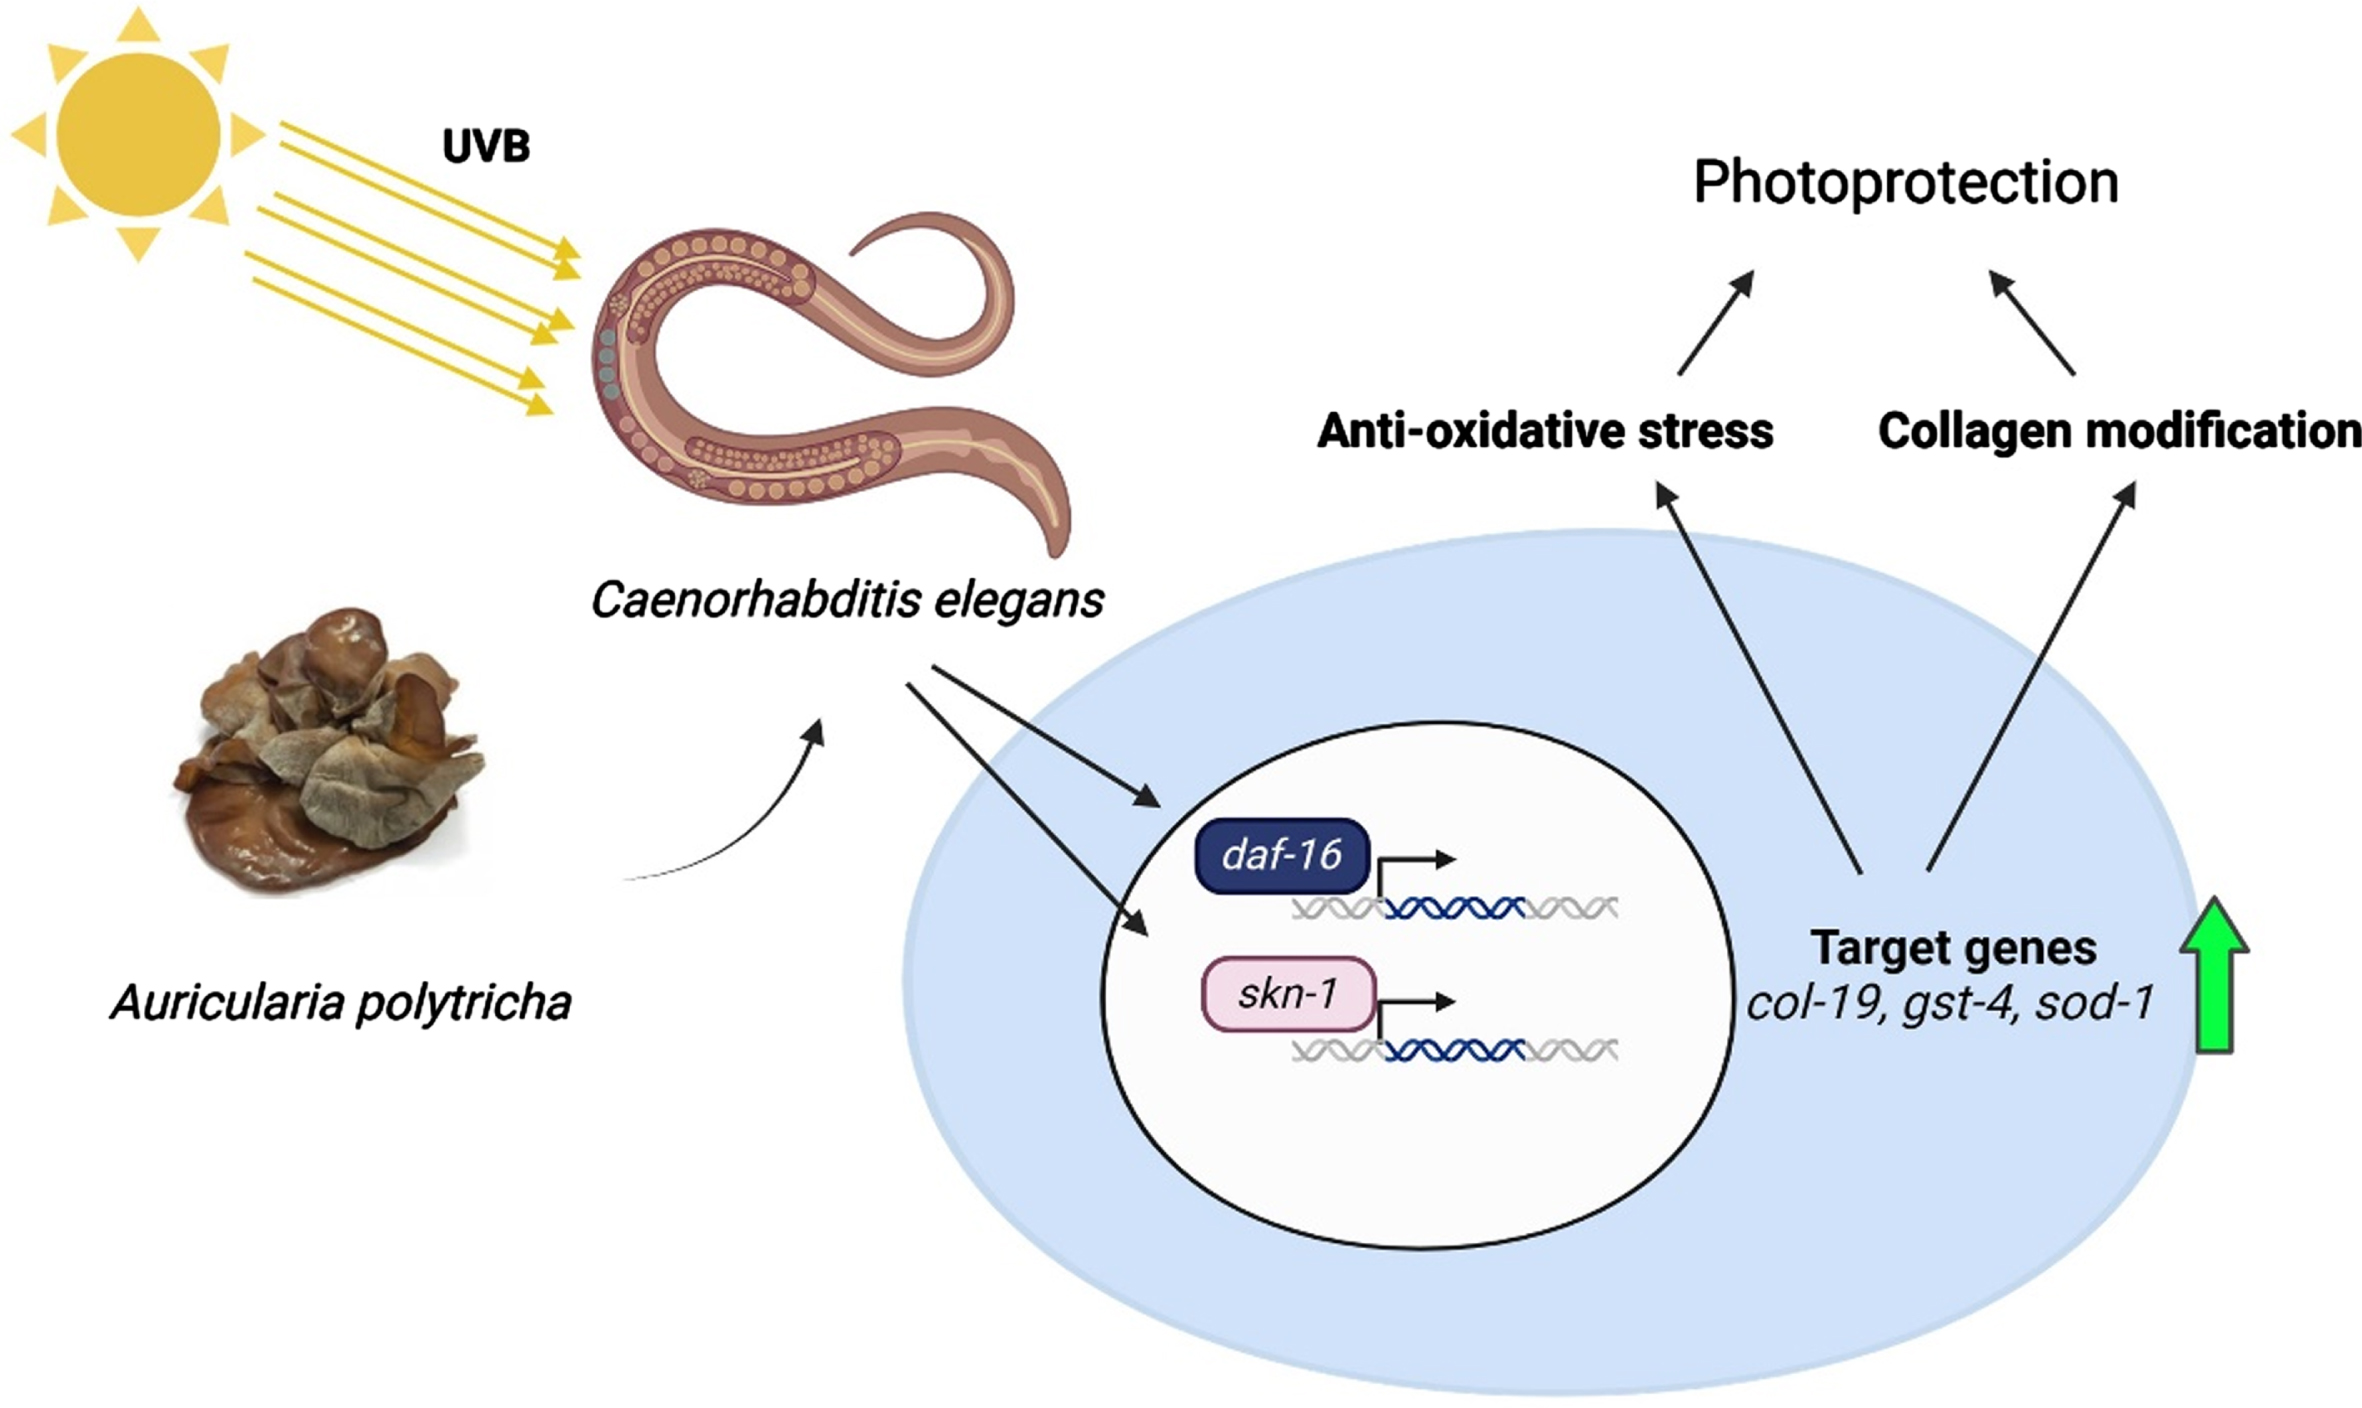 A schematic representation of the protective effect of APE against UV-B radiation in C. elegans.